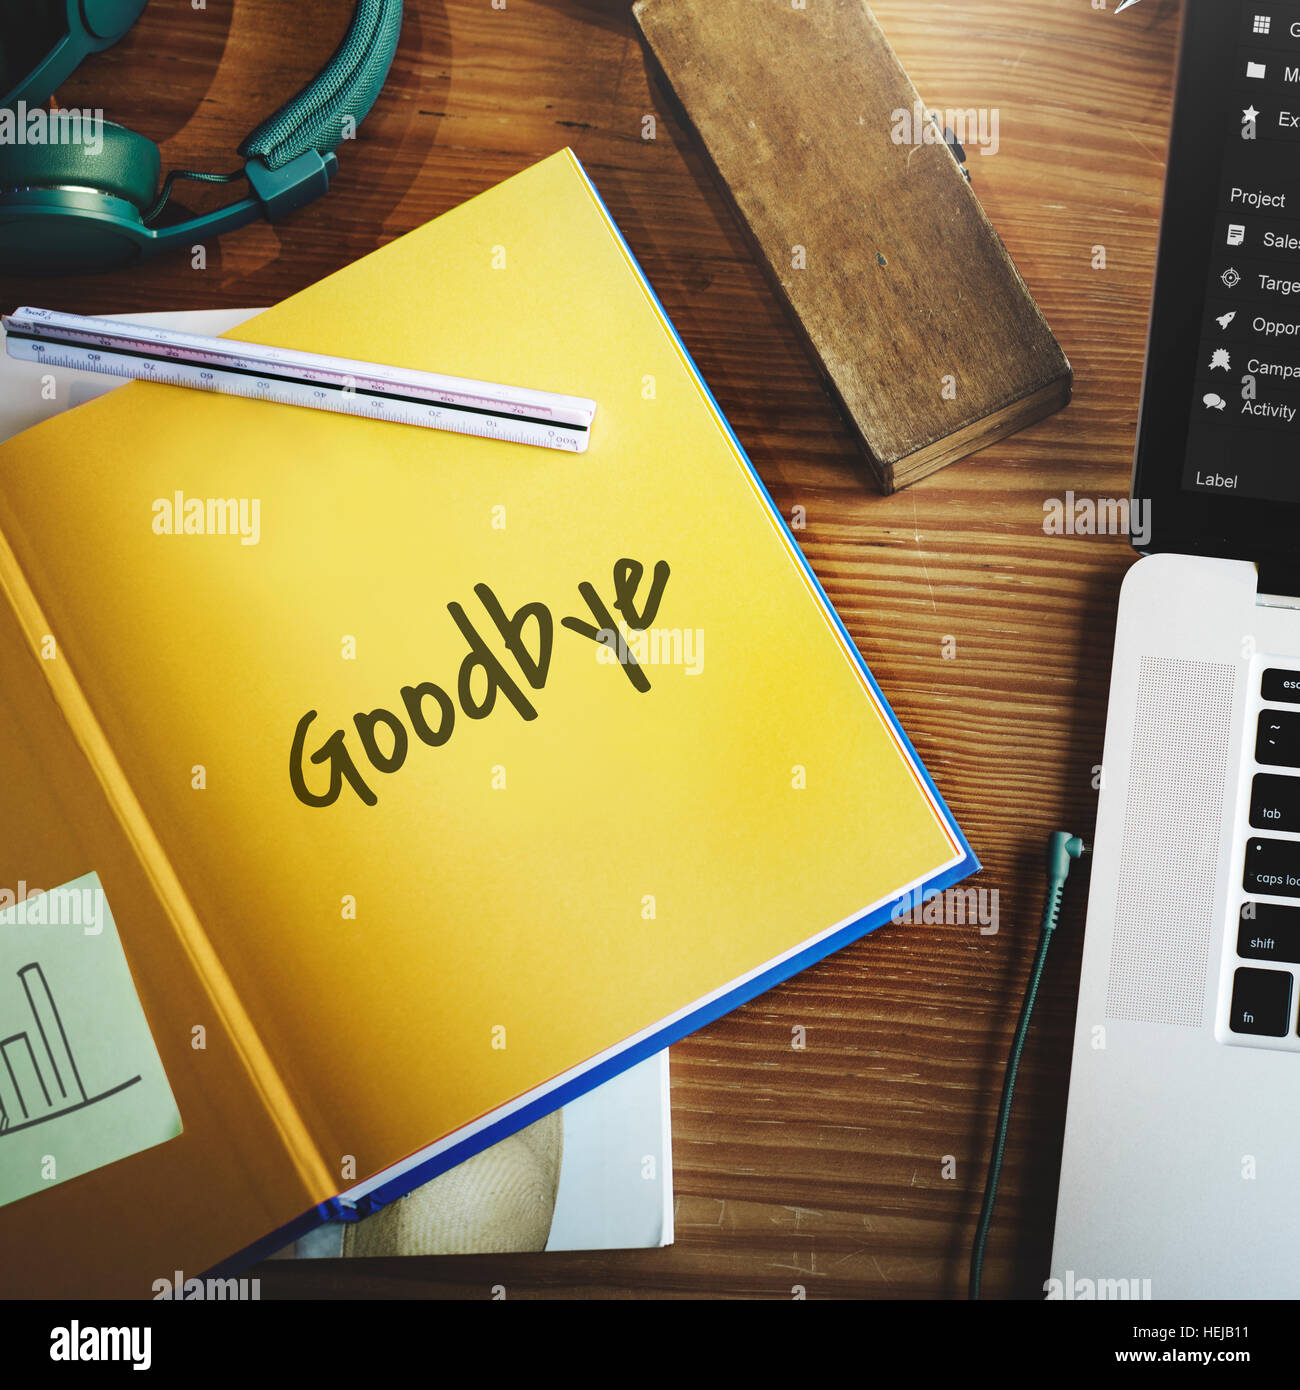 Goodbye Farewell Phrase Saying Leave Later Concept Stock Photo